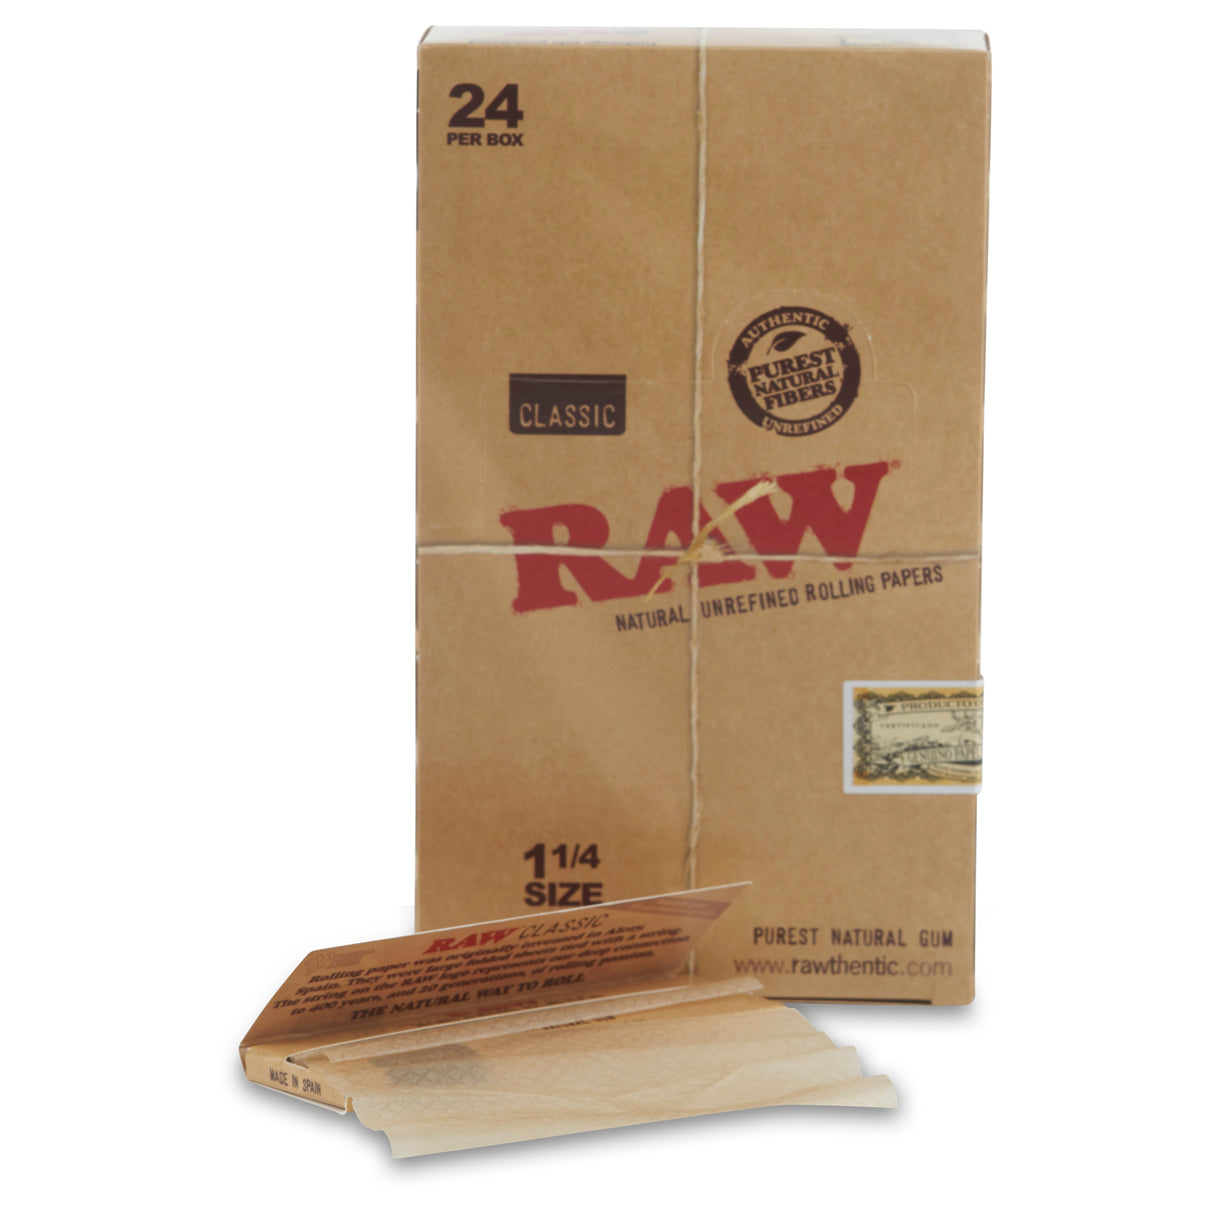 RAW Classic Tips • RAWthentic • RAW Rolling Papers Official Site